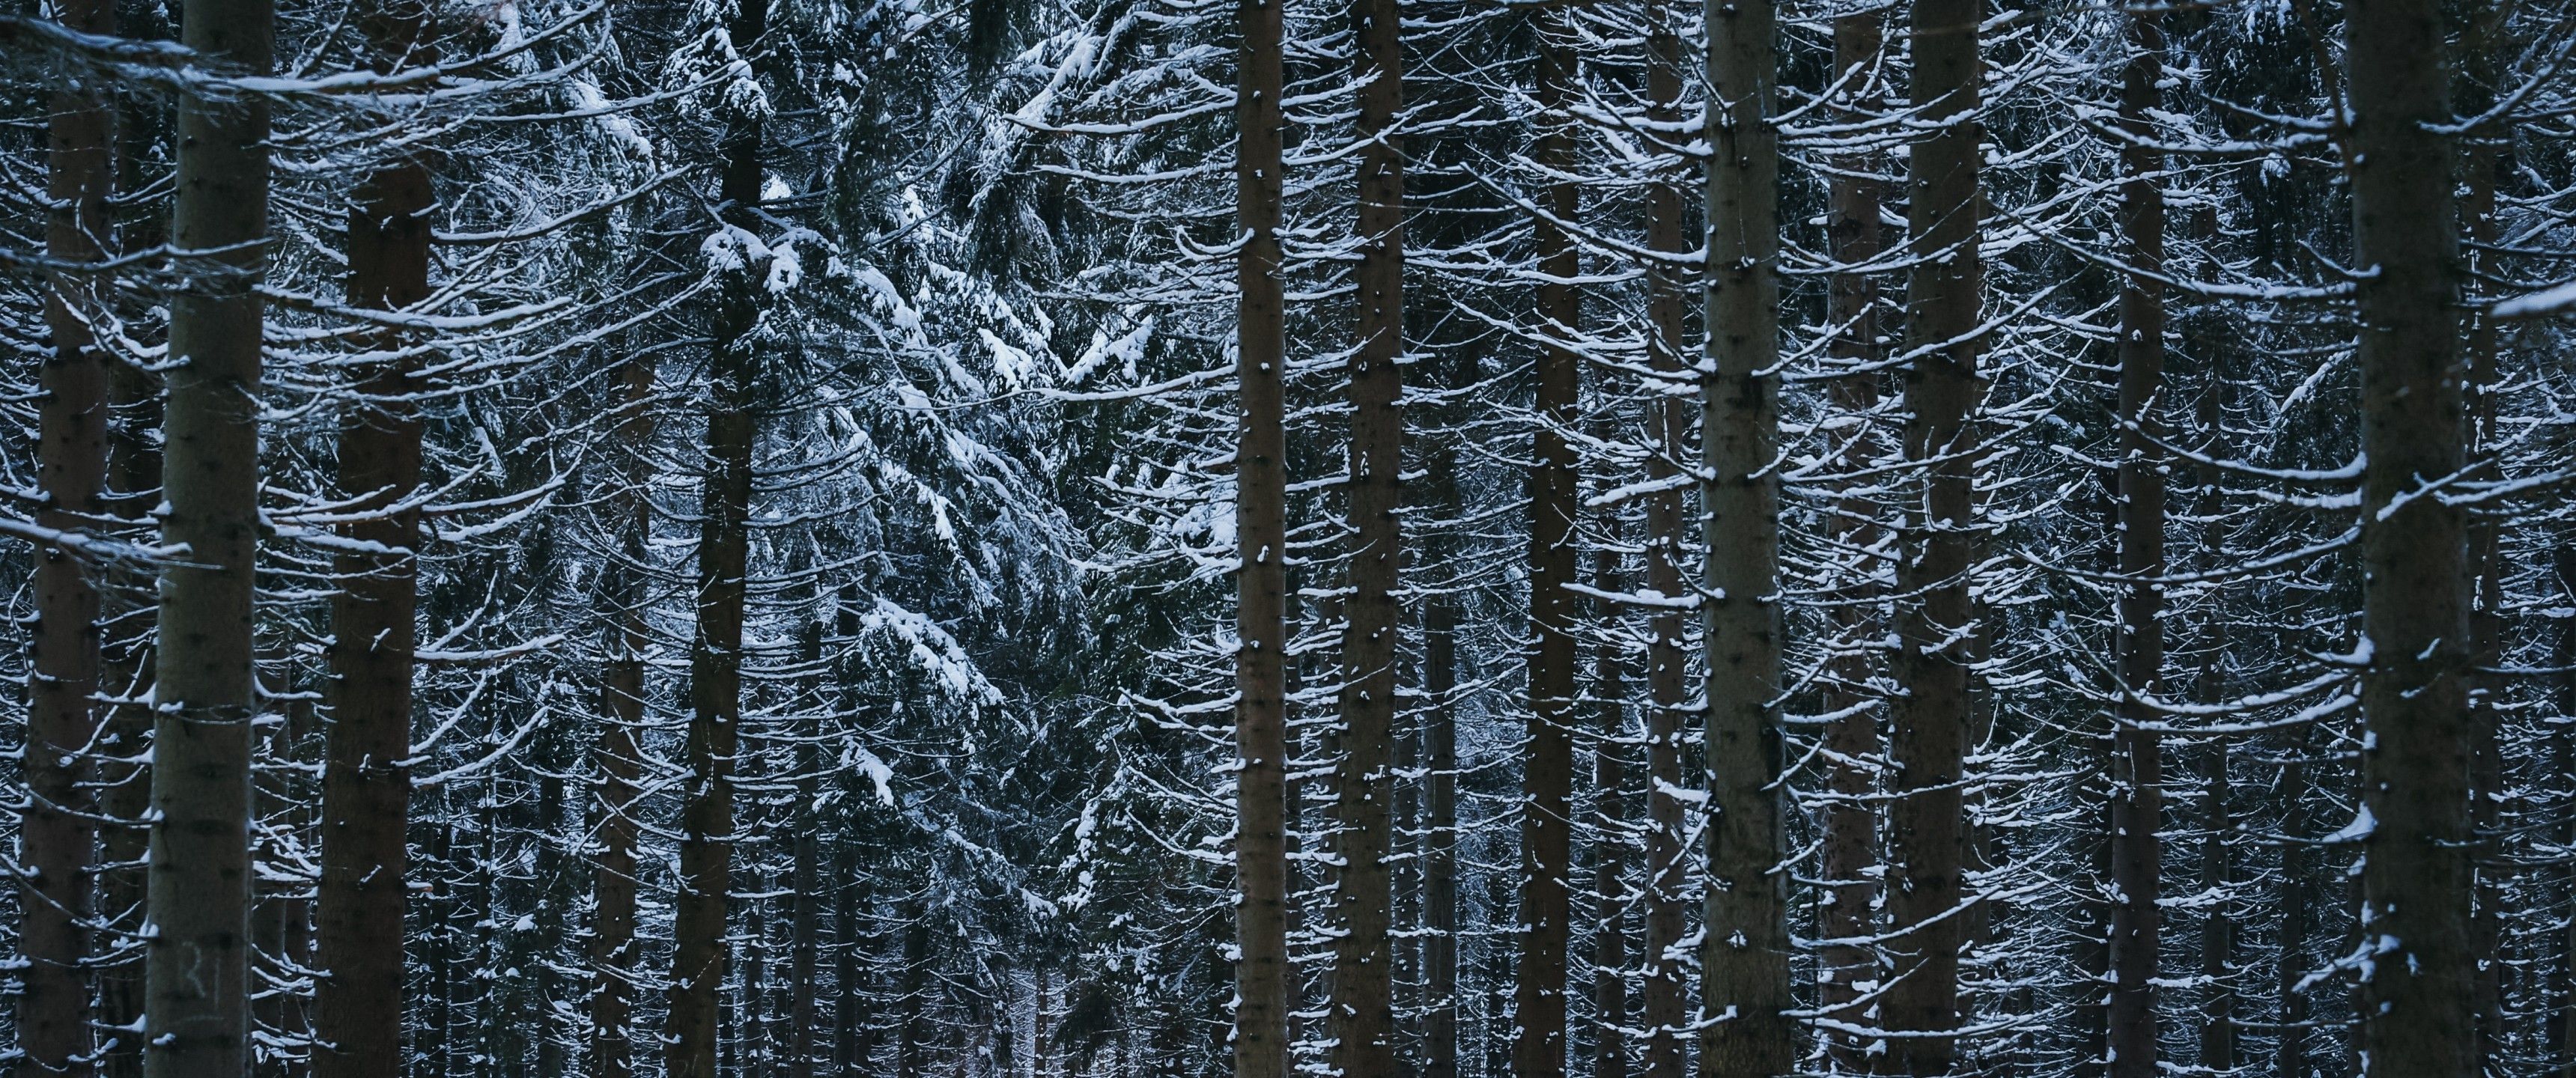 Winter, Snow, Trees, Forest Wallpaper 1440p